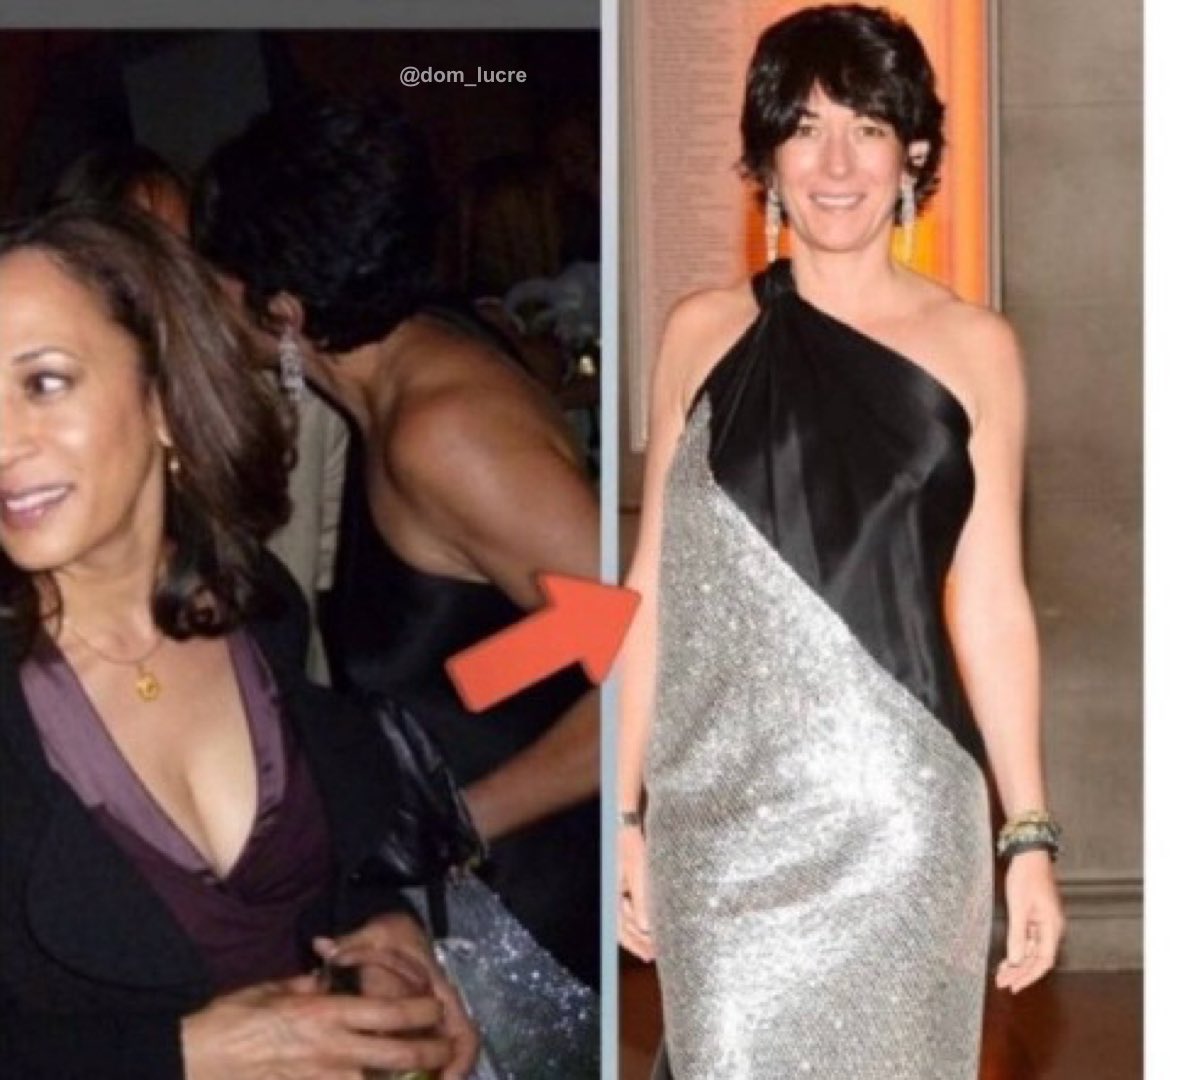 On April 25, 2012, Kamala Harris attended the Gucci hosted MSKCC's fifth annual spring ball at the Metropolitan Museum of Art with Jeffrey Epstein’s wife Ghislaine Maxwell in New York.